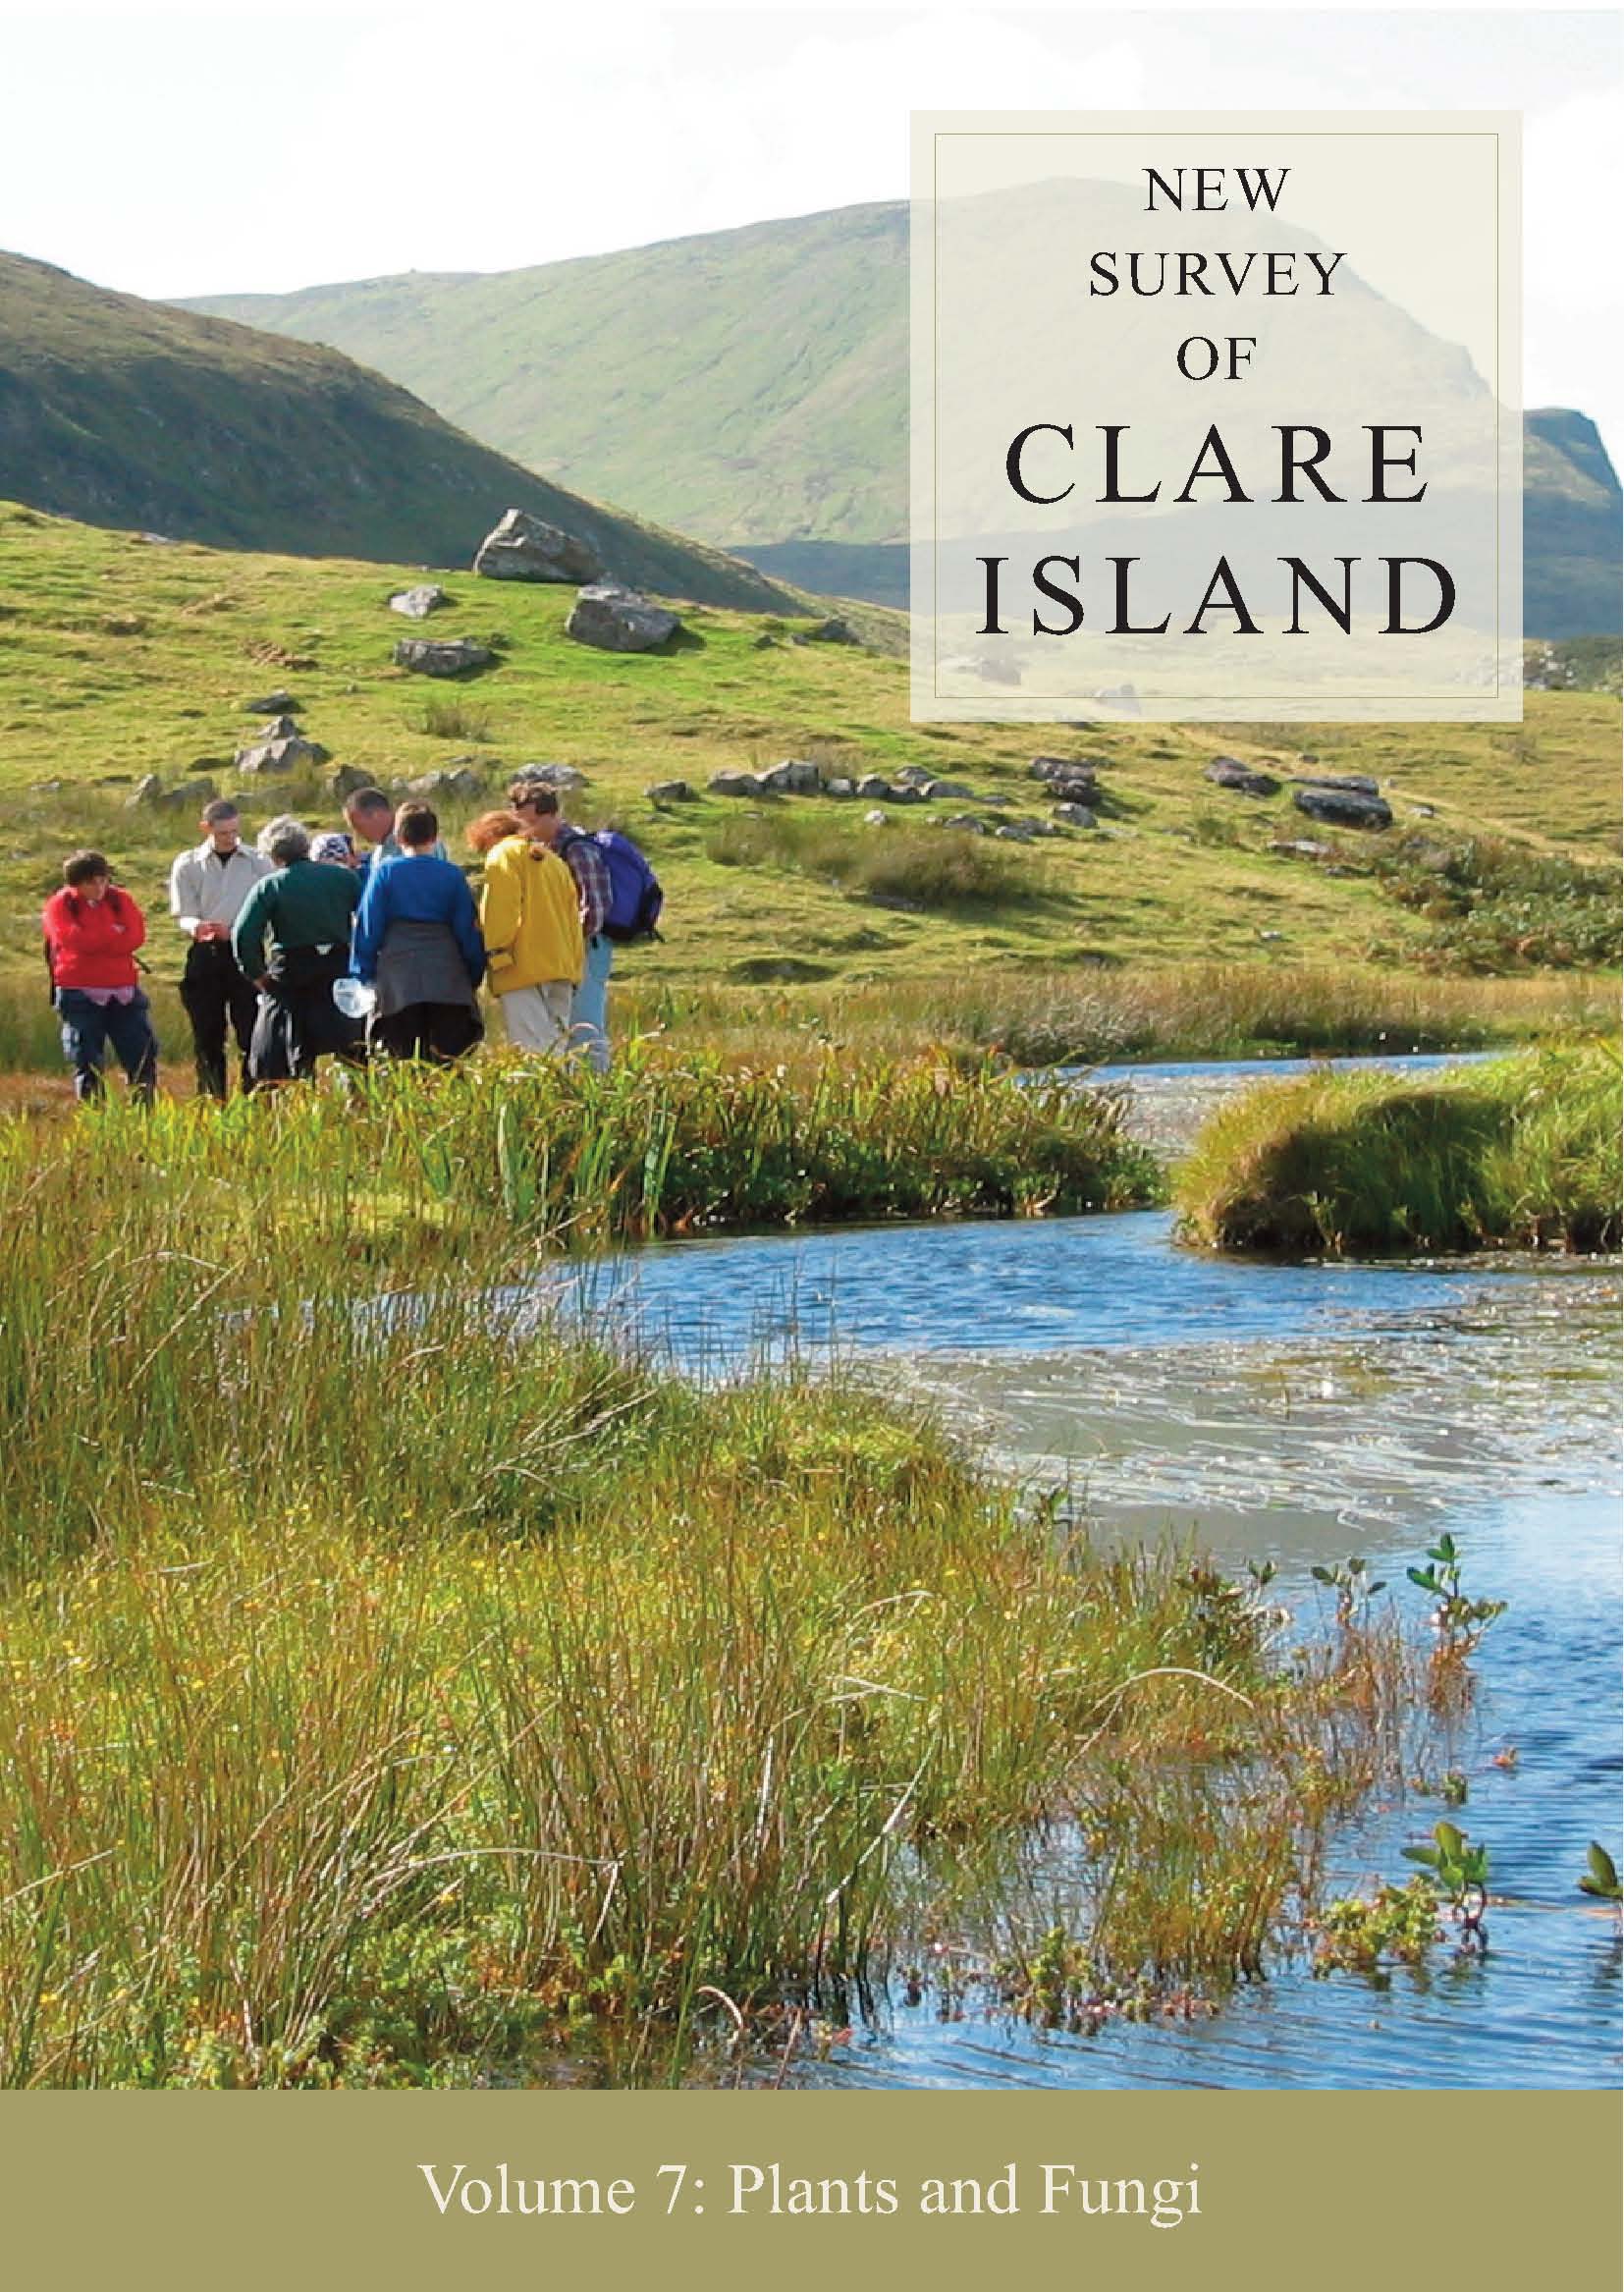 New Survey of Clare Island Volume 7: Plants and Fungi